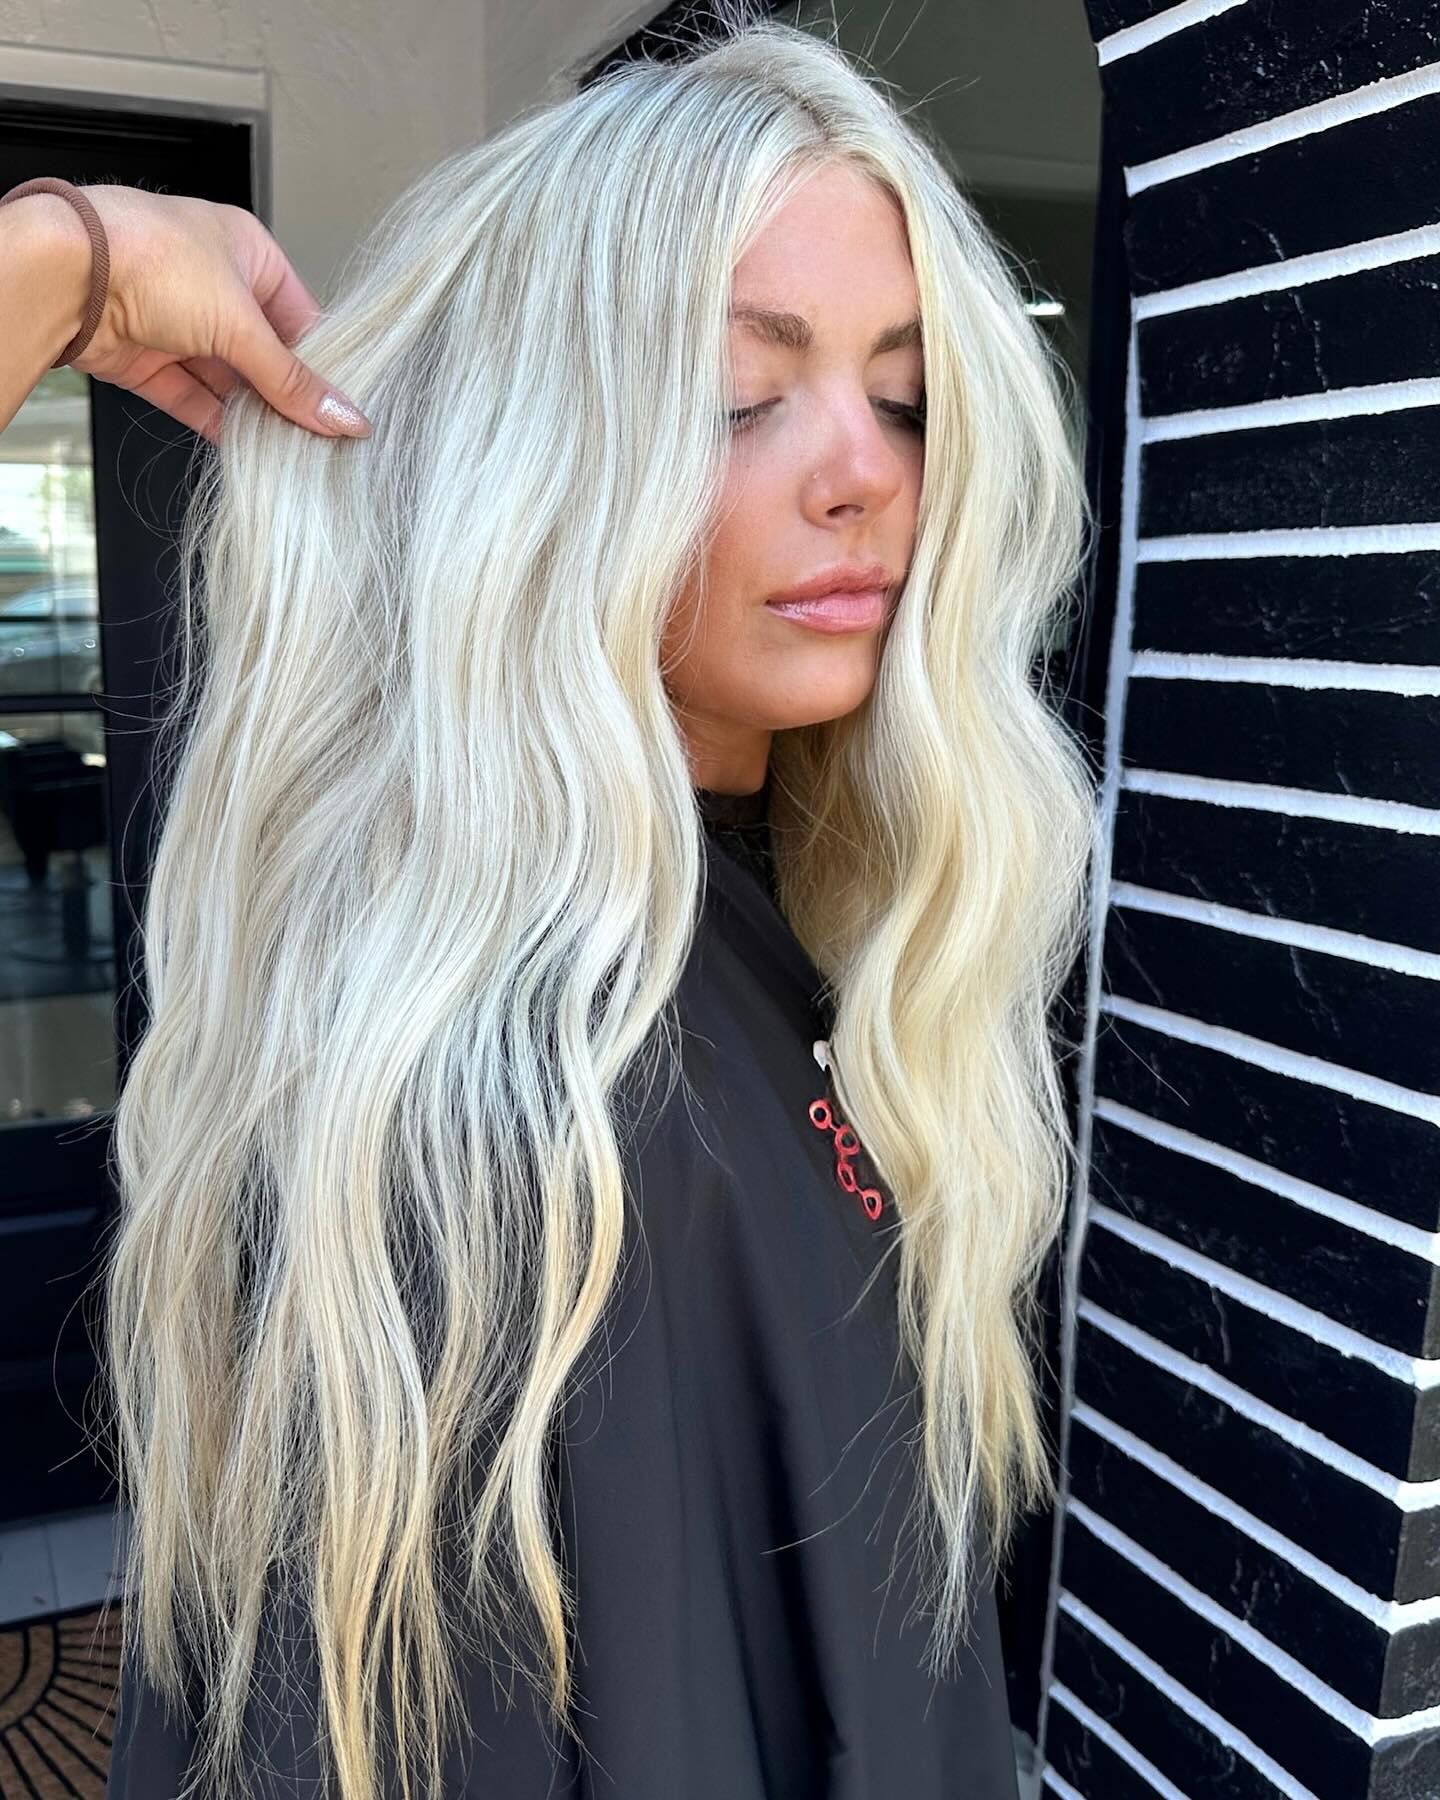 Hair and lips glossy for summer. 

Let&rsquo;s be real friends, is it really summer if you&rsquo;re not blonde. Do yourself a favor and book that appointment. 

#tampasbeautylounge #tampablondes #tampablondespecialist #blondhairtampa #tampablonde #ta